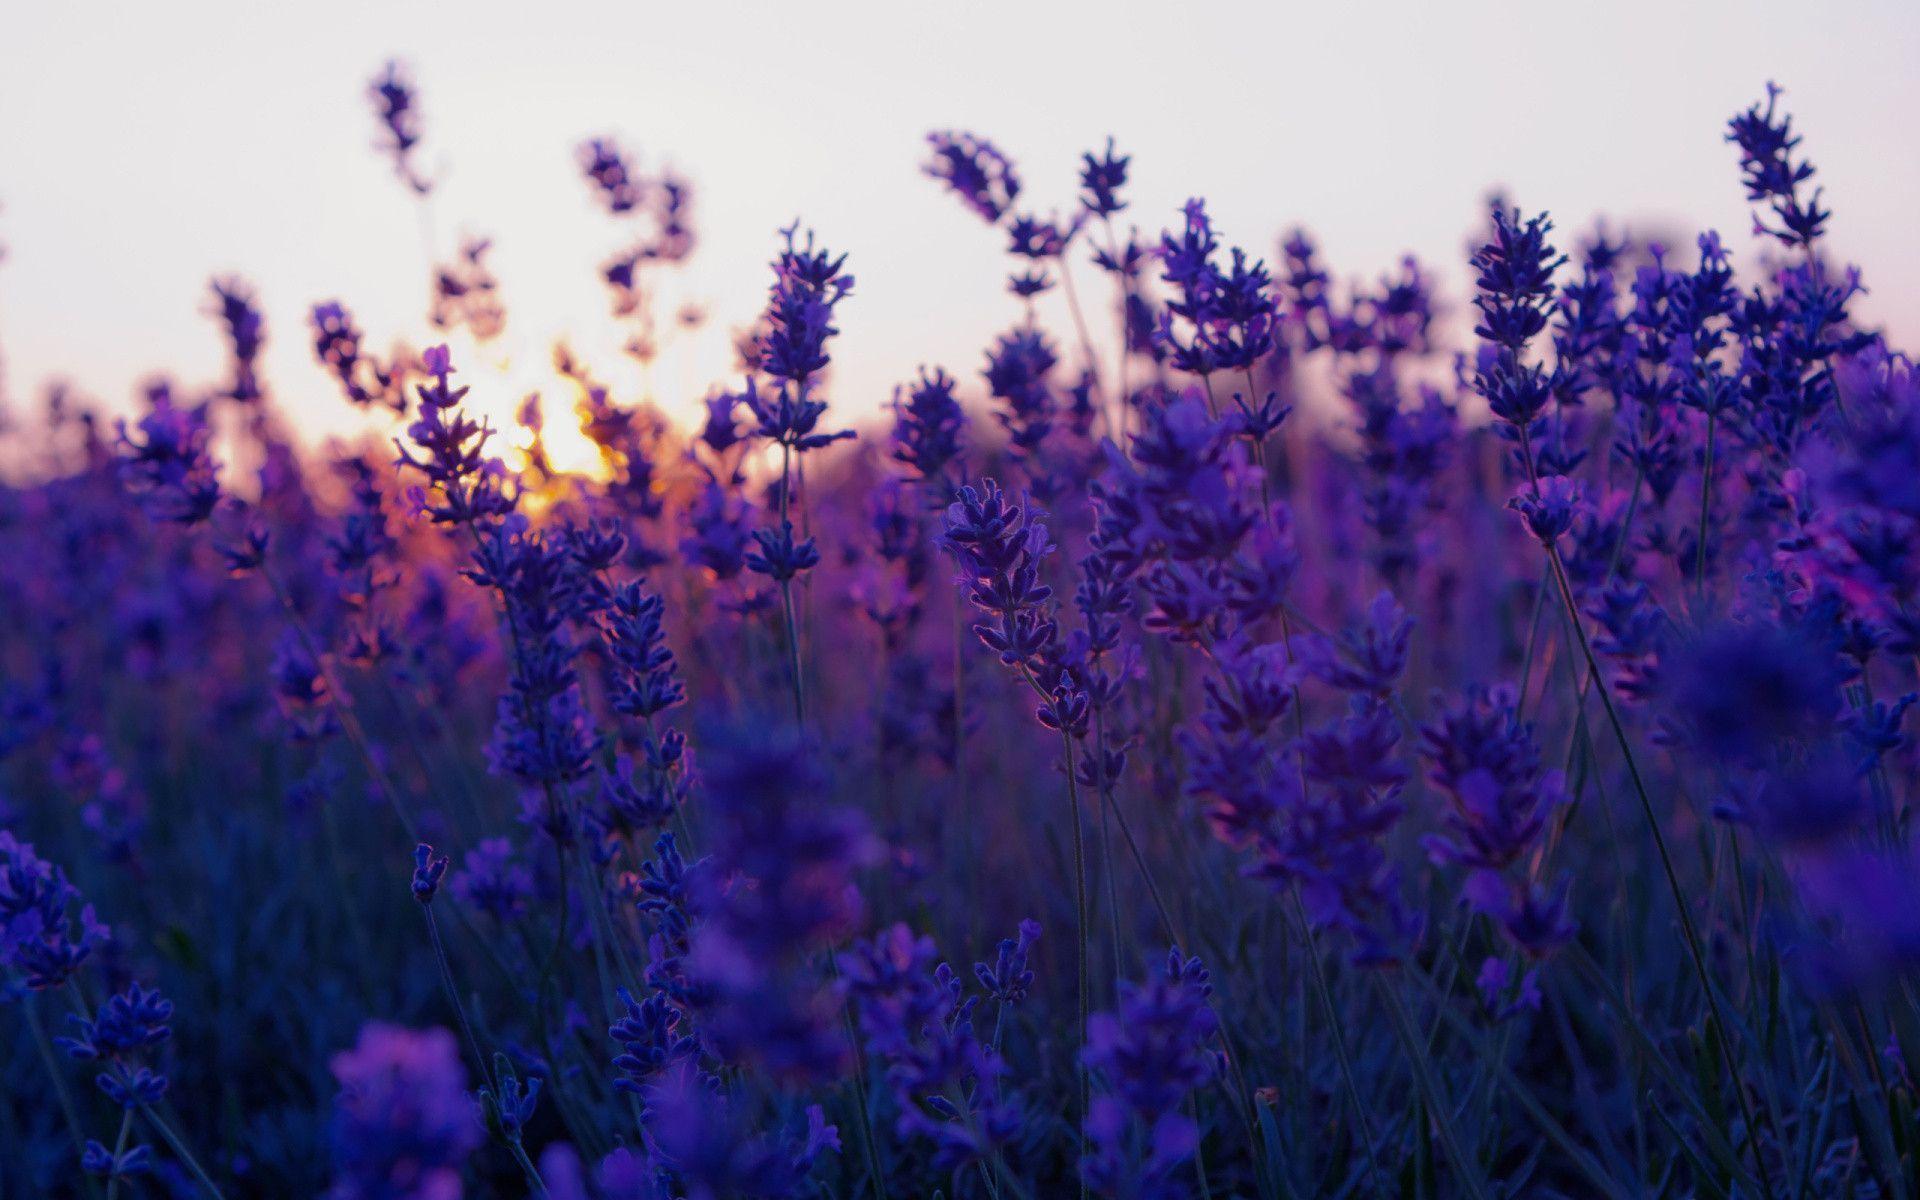 Lavender plants in a field during a sunset - Flower